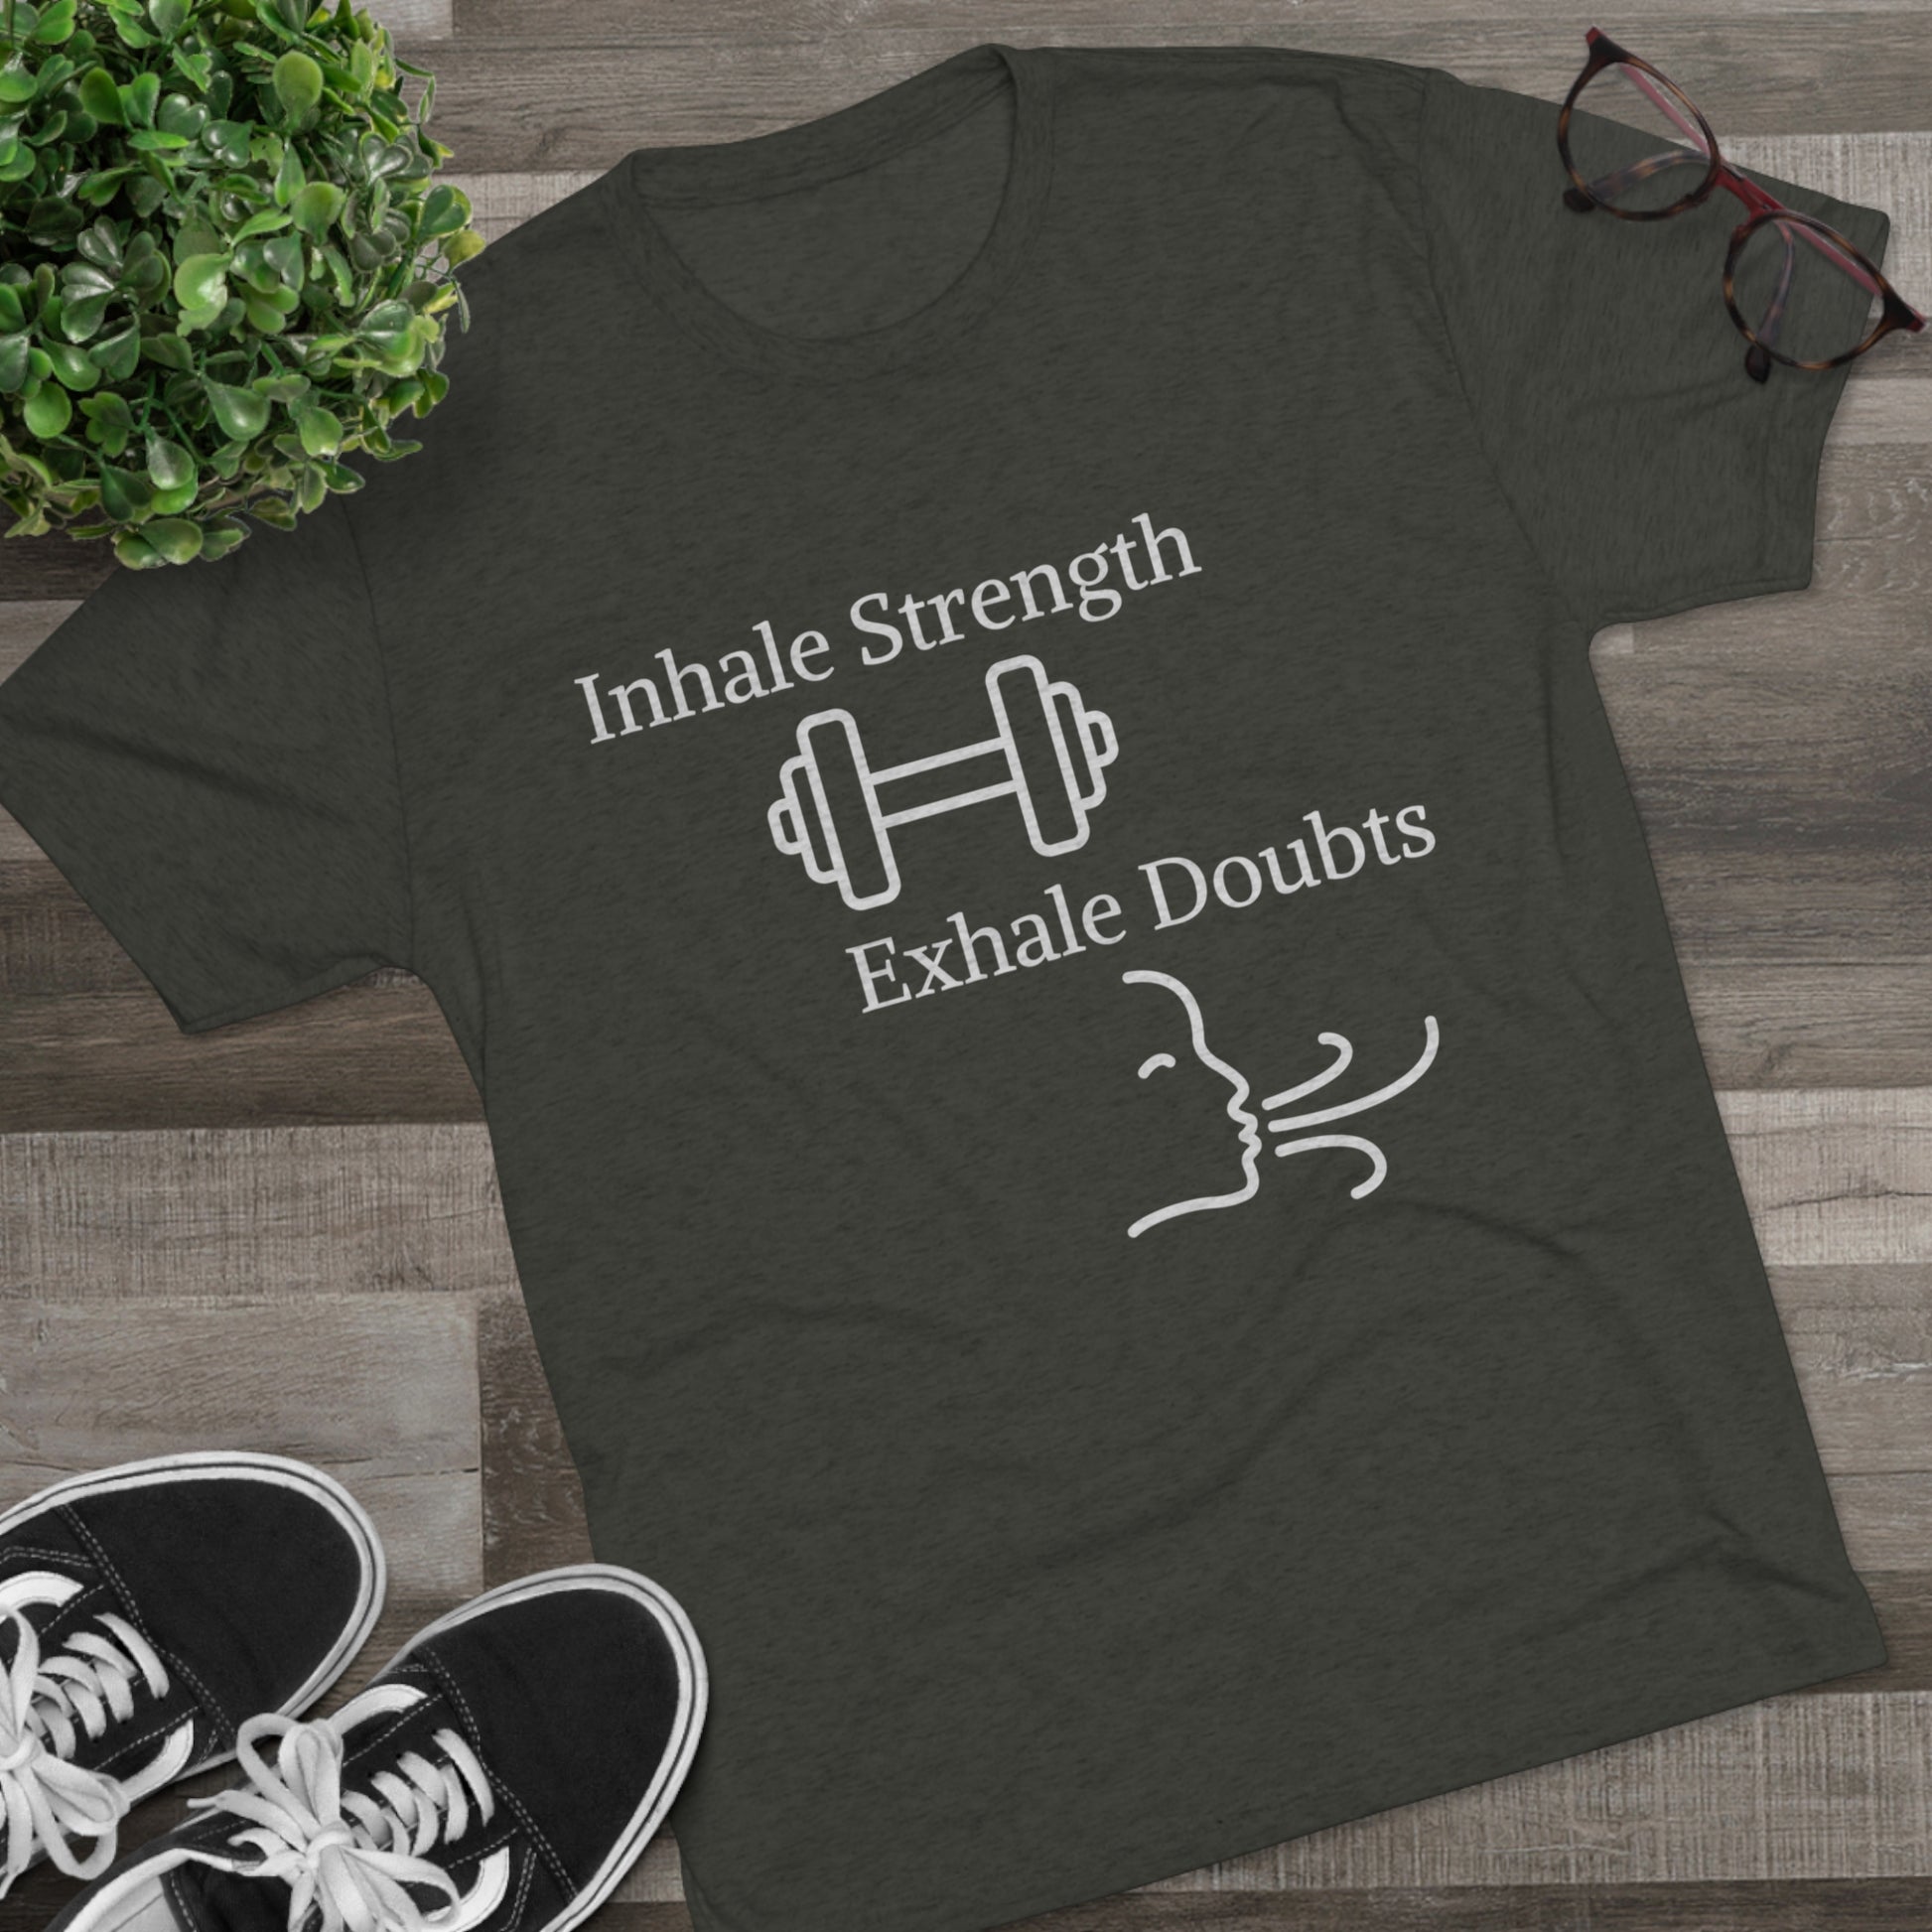 A charcoal gray workout apparel t-shirt on a wooden floor with the Inhale Strength Exhale Doubt w Images - Unisex Tri-Blend Crew Tee by Printify, and accompanying sneakers and glasses.